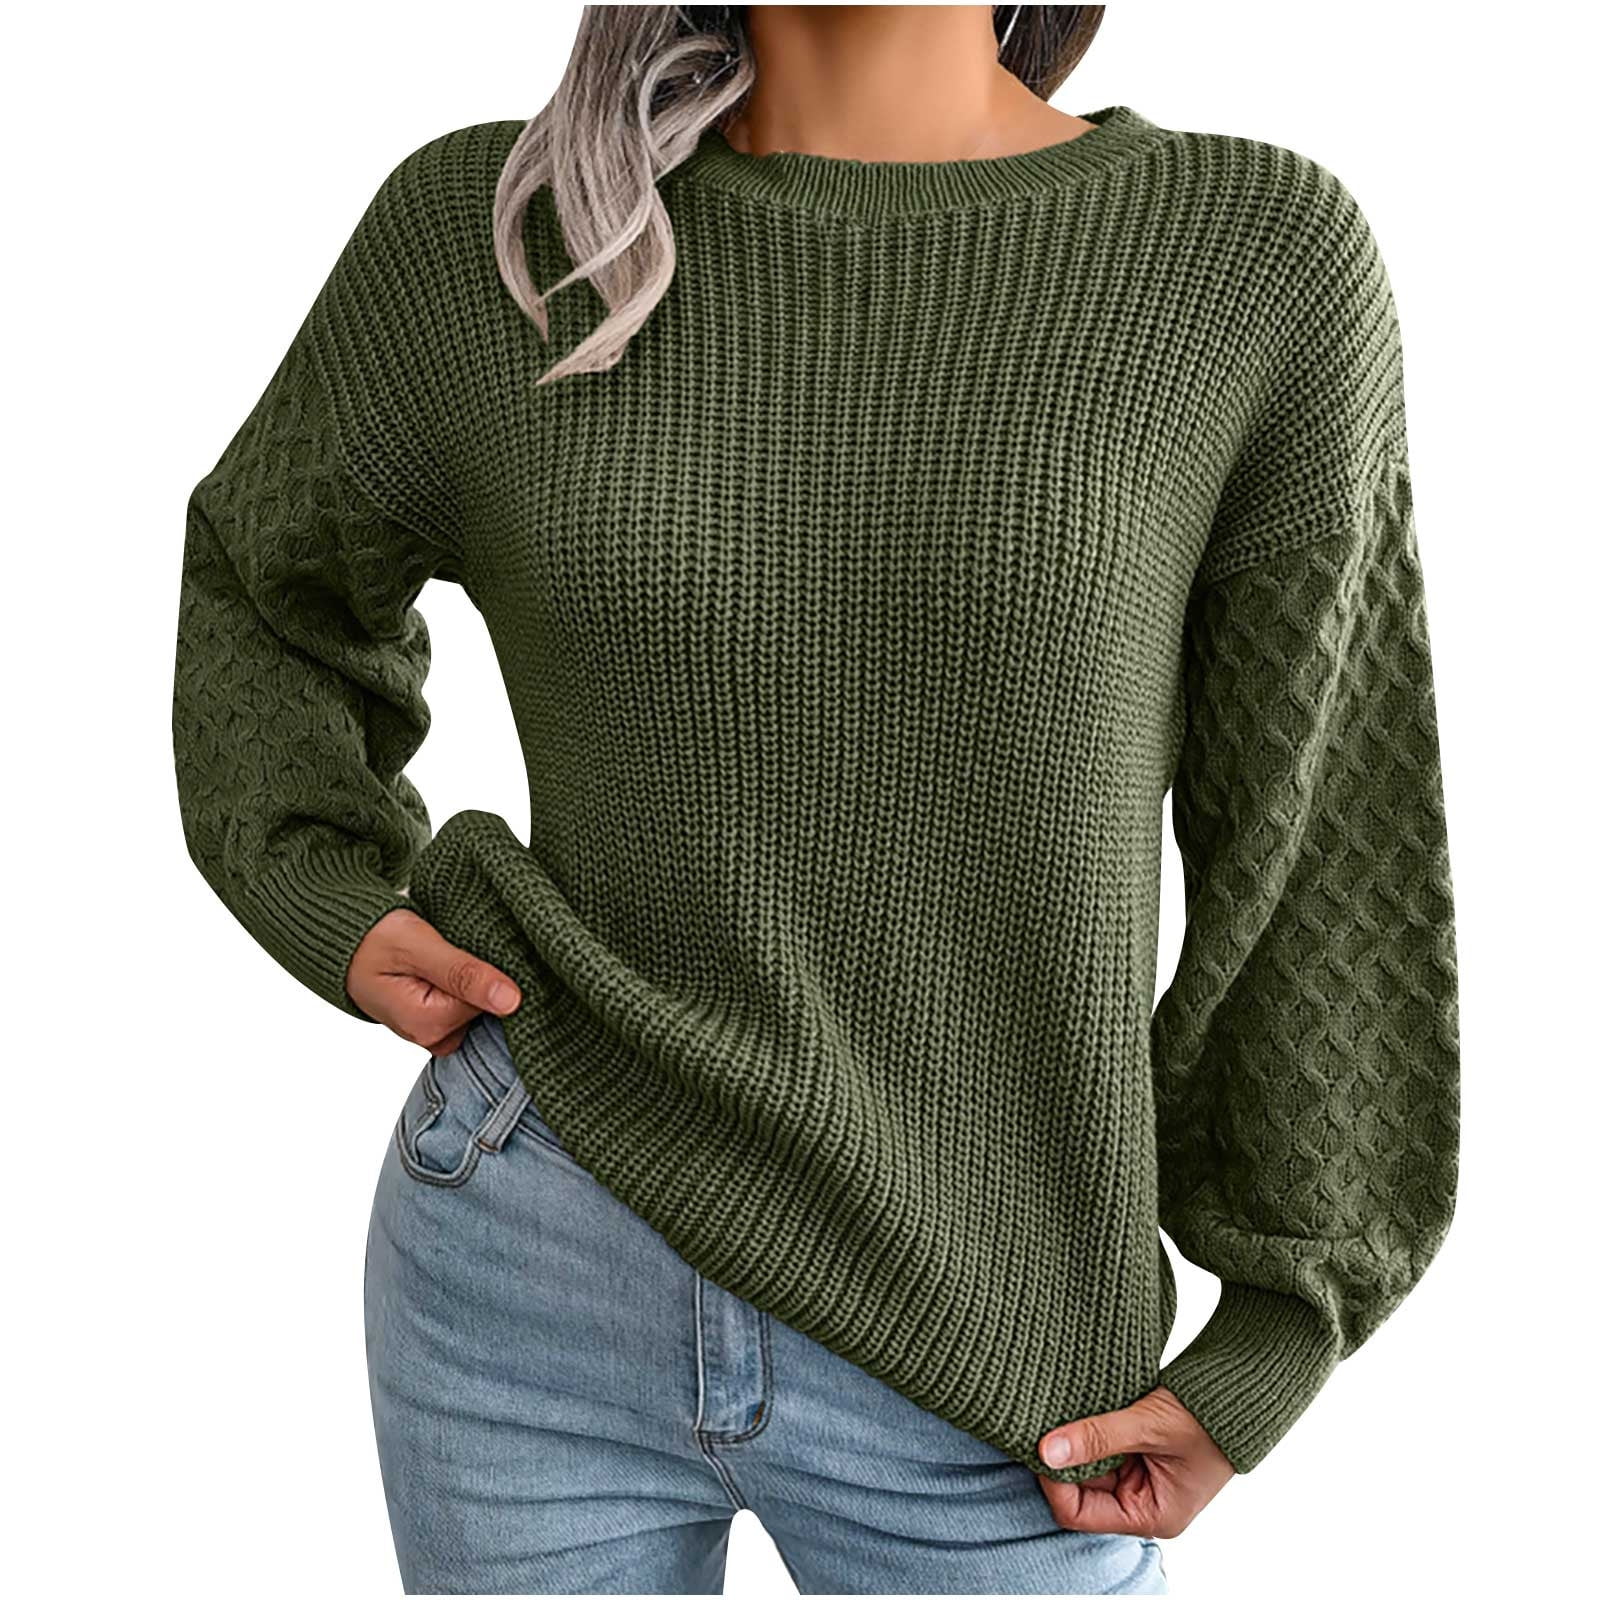 Scyoekwg Women Sweaters for Fall and Winter Comfy Long Sleeve Knitted  Sweaters Pullover Ladies Sweaters Round Neck Sweaters Classic Solid Colors